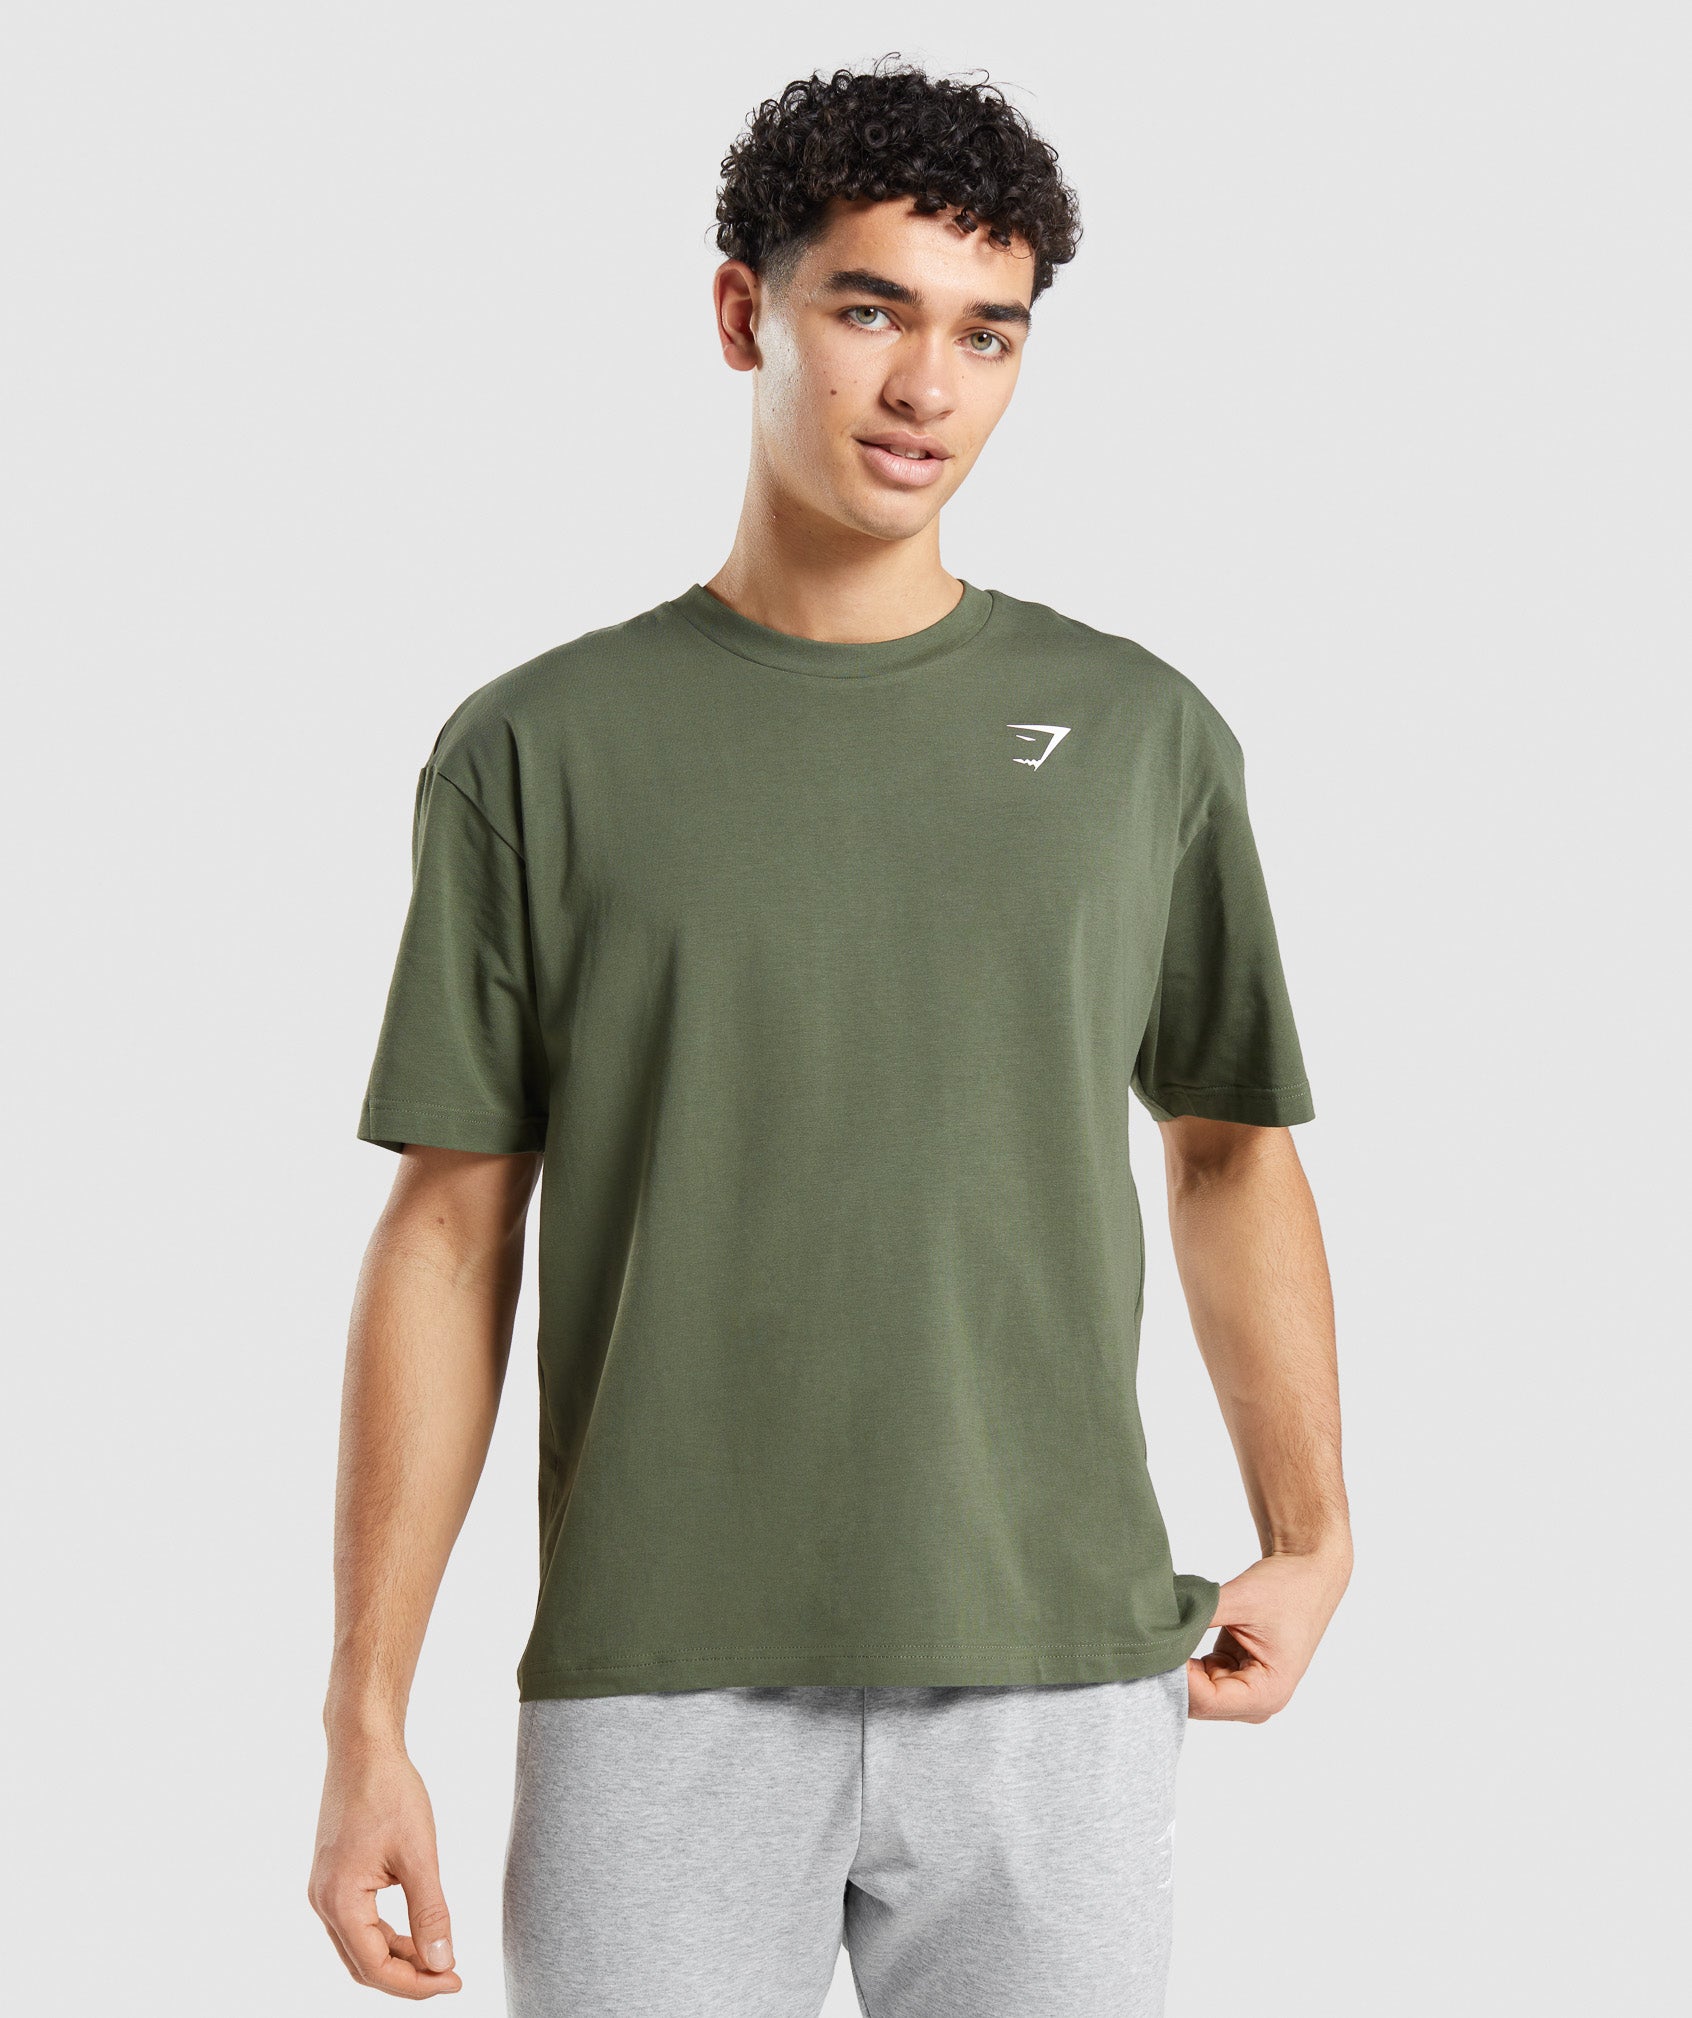 Essential Oversized T-Shirt in Core Olive is out of stock